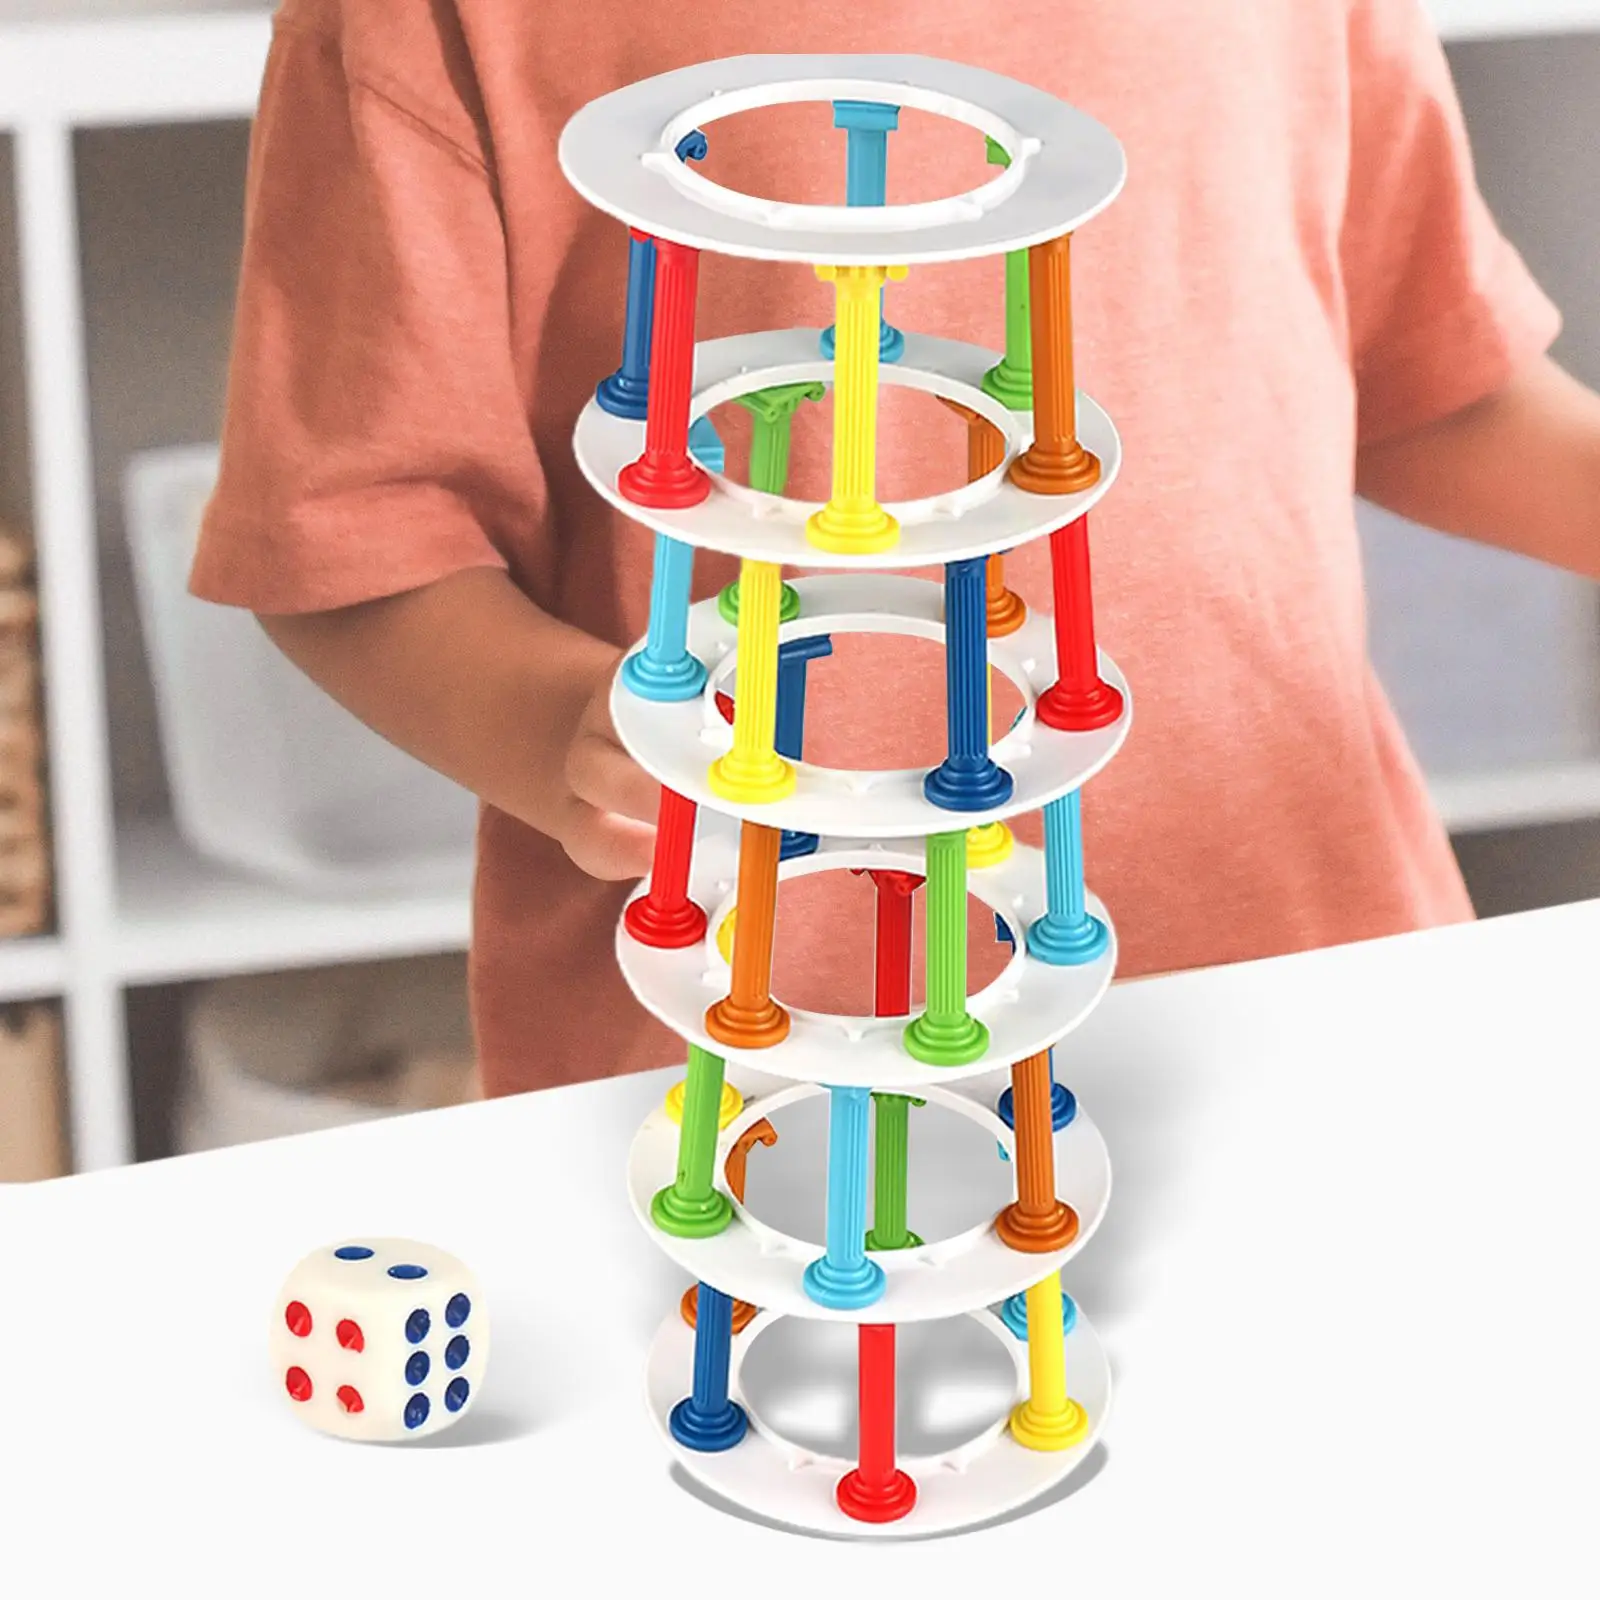 Tumble Tower Game Board Games Classic Games Stacking Tumble Tower for Indoor